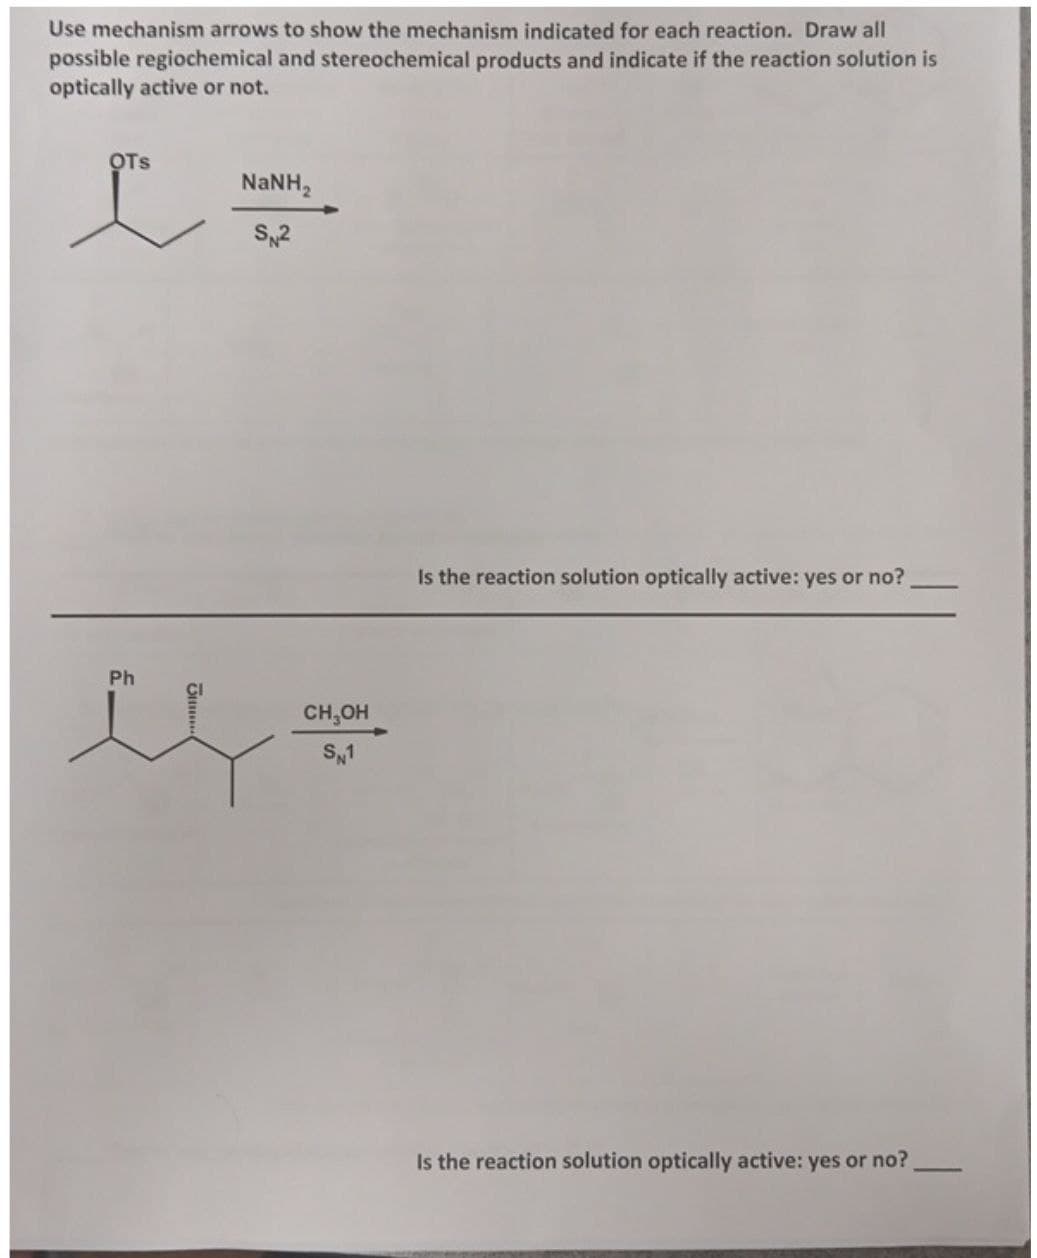 Use mechanism arrows to show the mechanism indicated for each reaction. Draw all
possible regiochemical and stereochemical products and indicate if the reaction solution is
optically active or not.
OTS
Ph
NaNH,
SN2
CH₂OH
SN1
Is the reaction solution optically active: yes or no?.
Is the reaction solution optically active: yes or no?